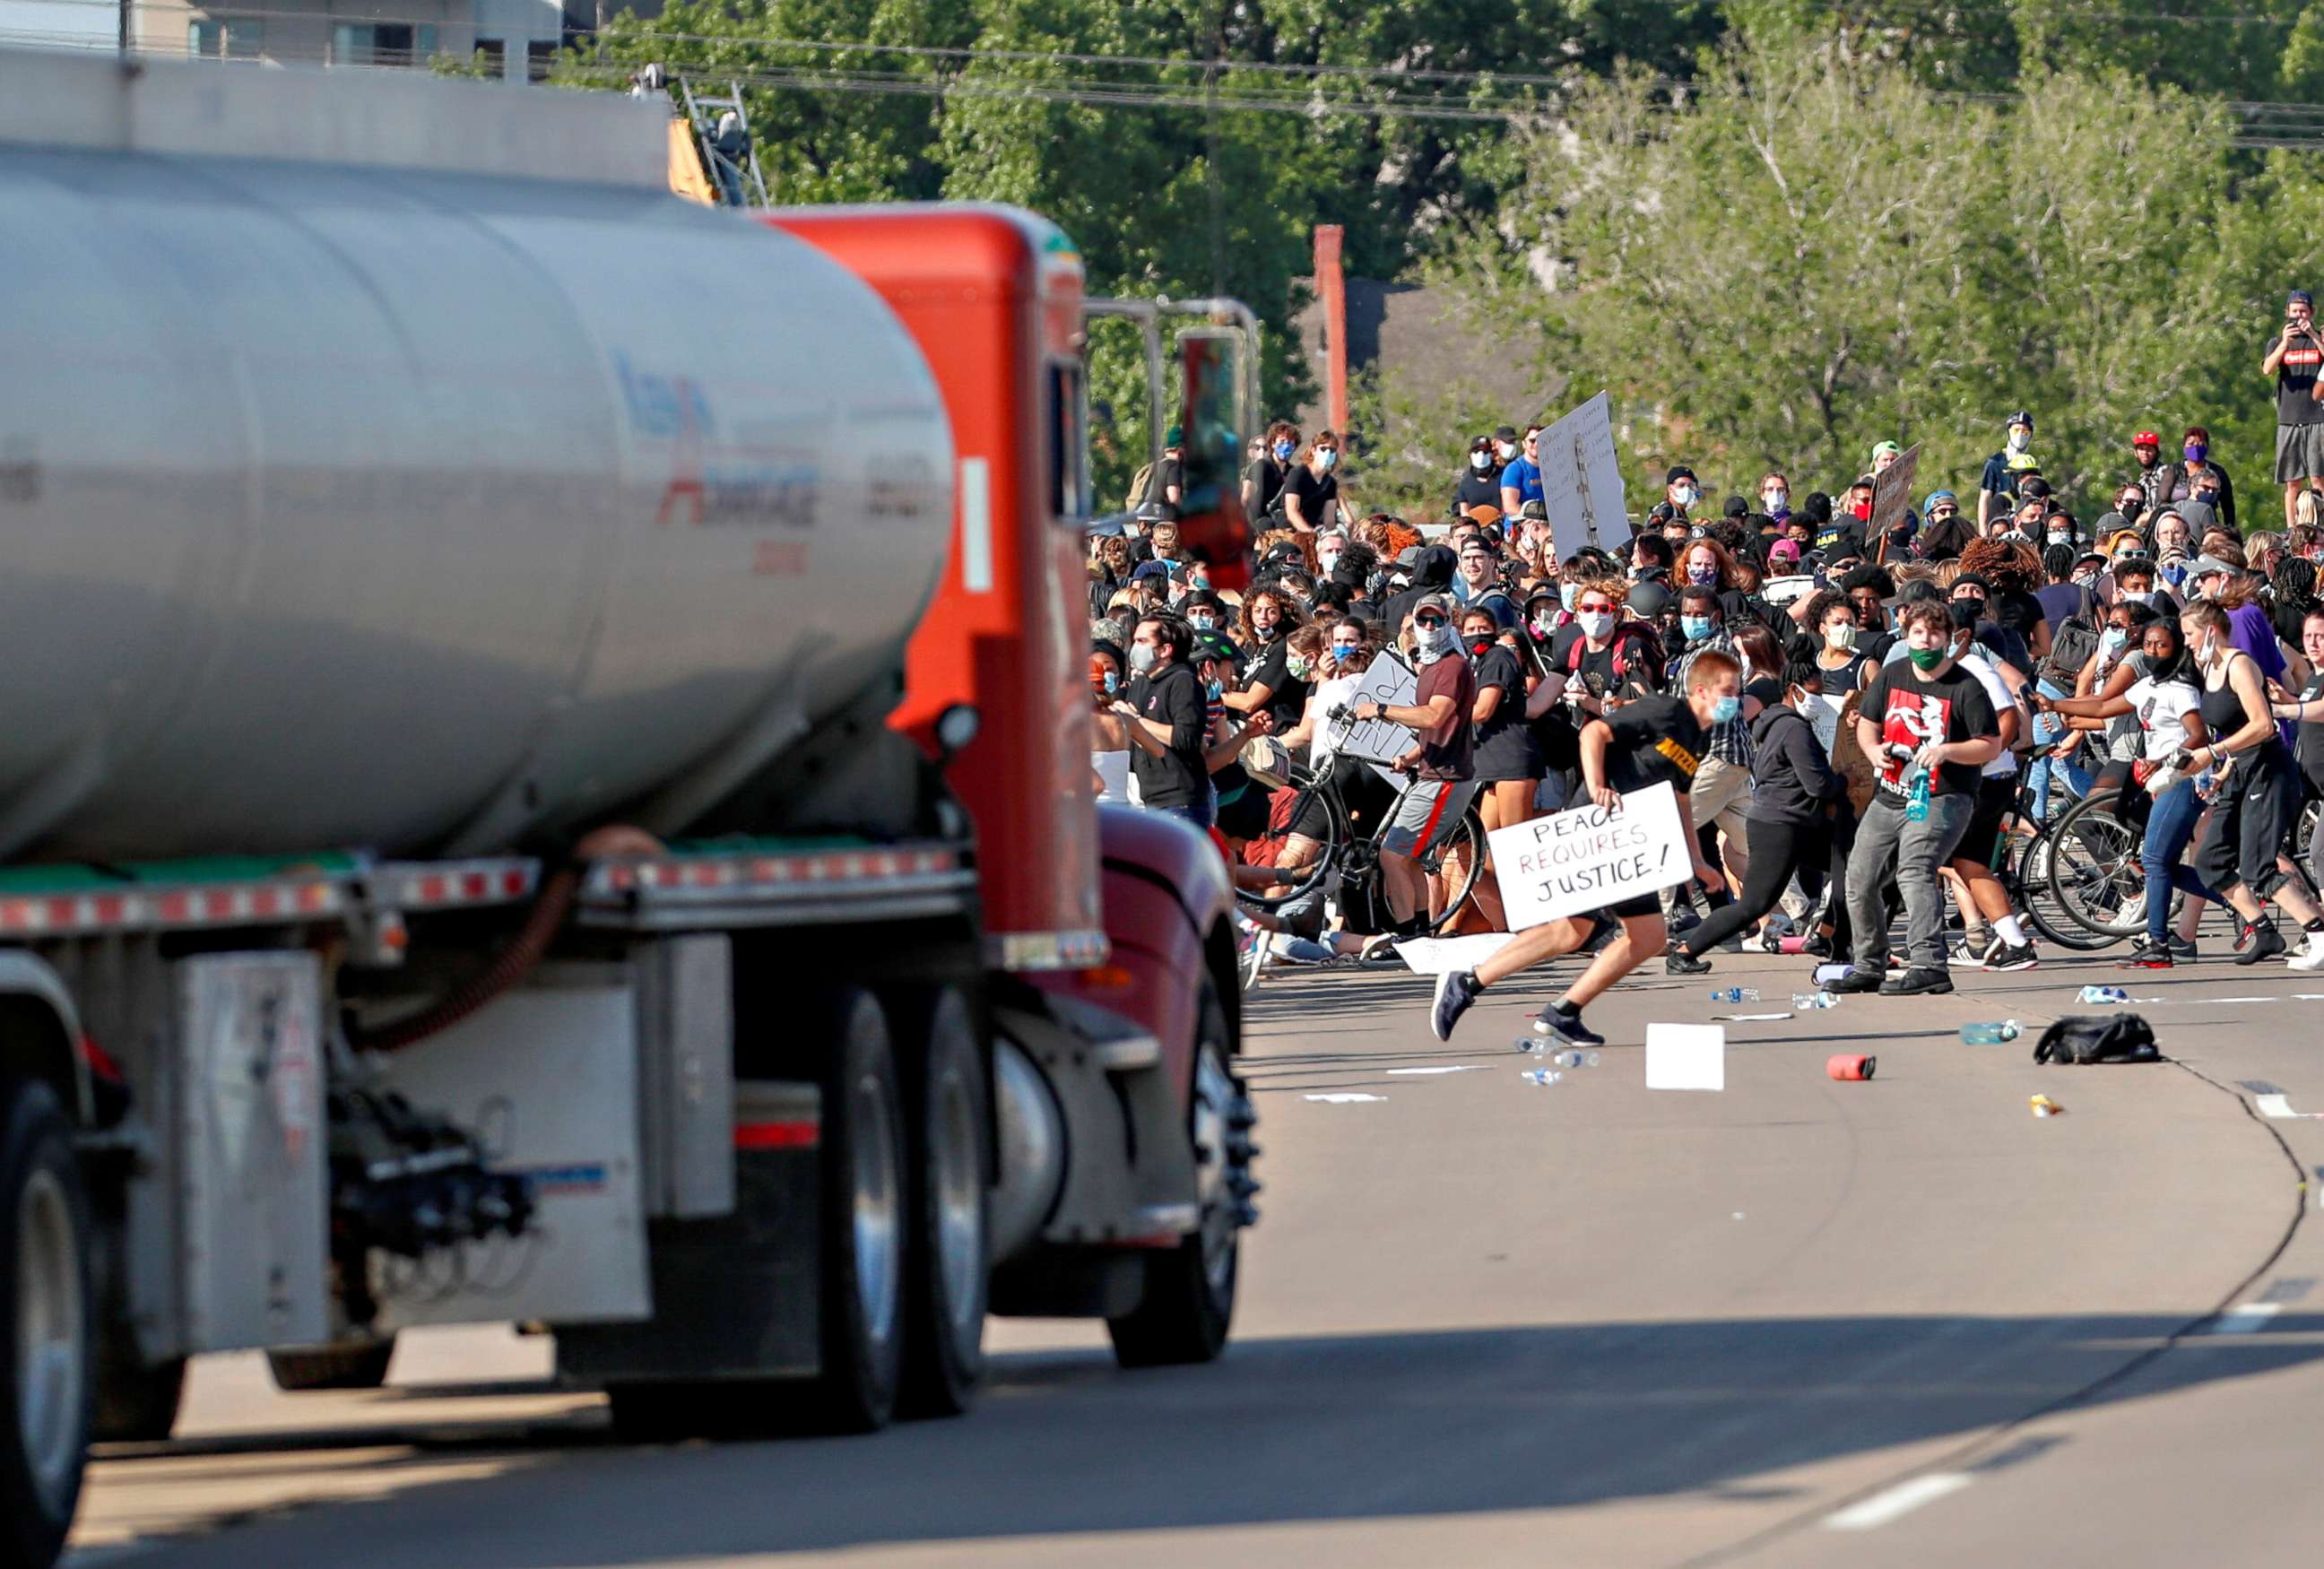 PHOTO: A tanker truck drives into thousands of protesters marching on 35W north bound highway during a protest against the death in Minneapolis police custody of George Floyd, in Minneapolis, May 31, 2020.